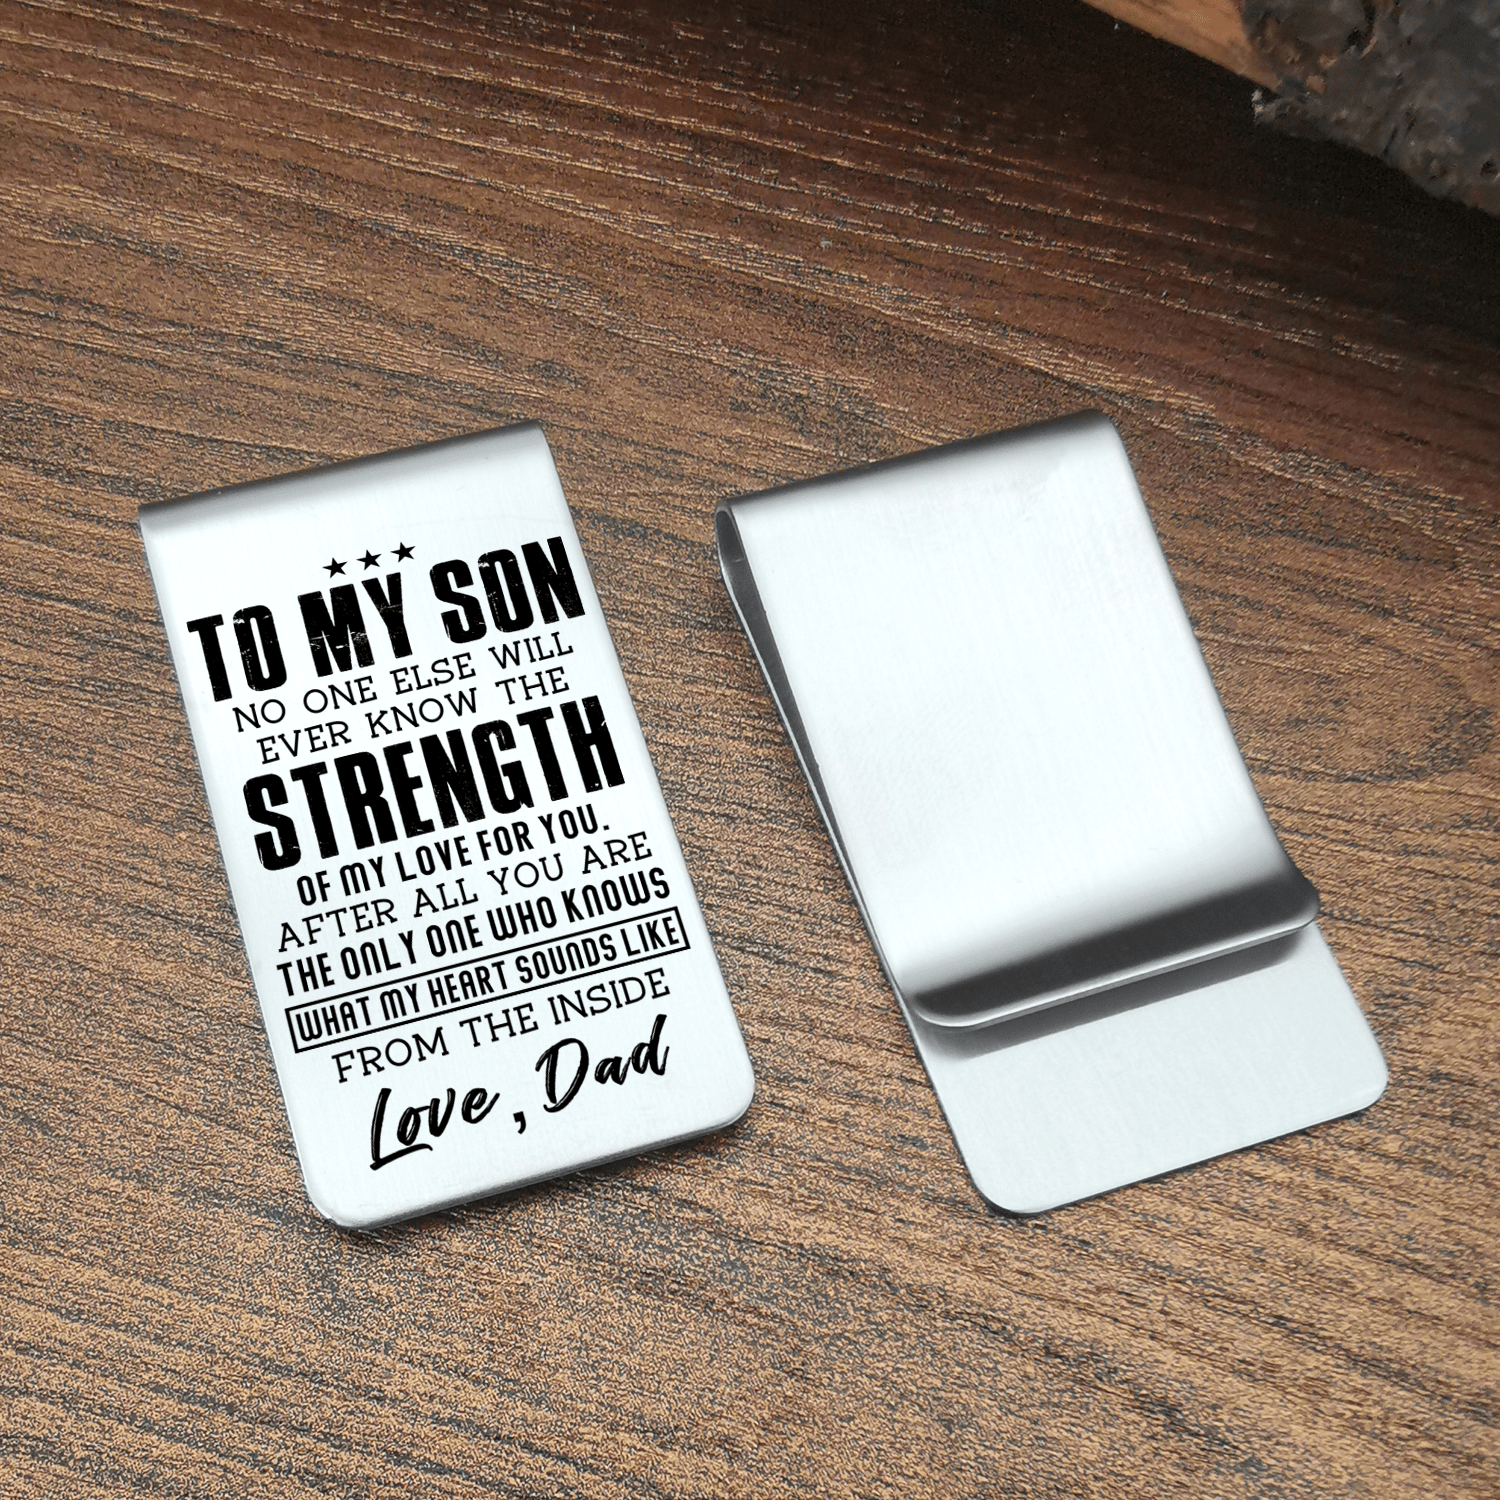 Money Clips Dad To Son - The Strength Of My Love For You Engraved Money Clip GiveMe-Gifts